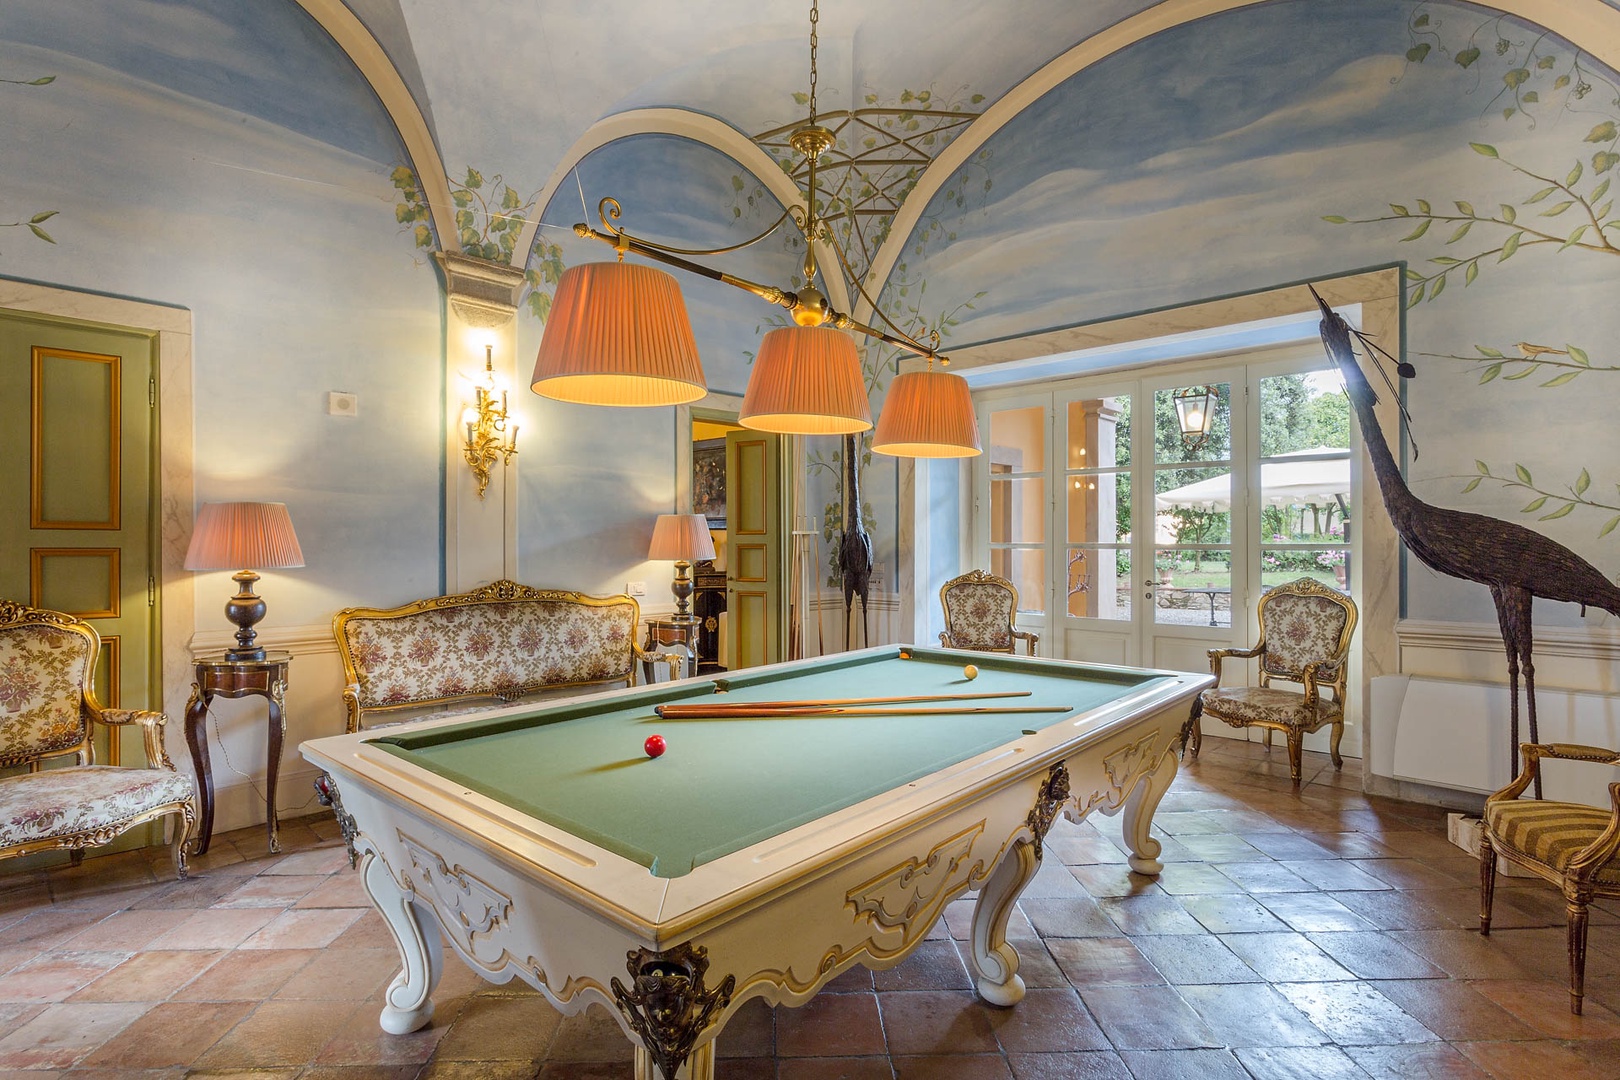 Billiard room with ample seating